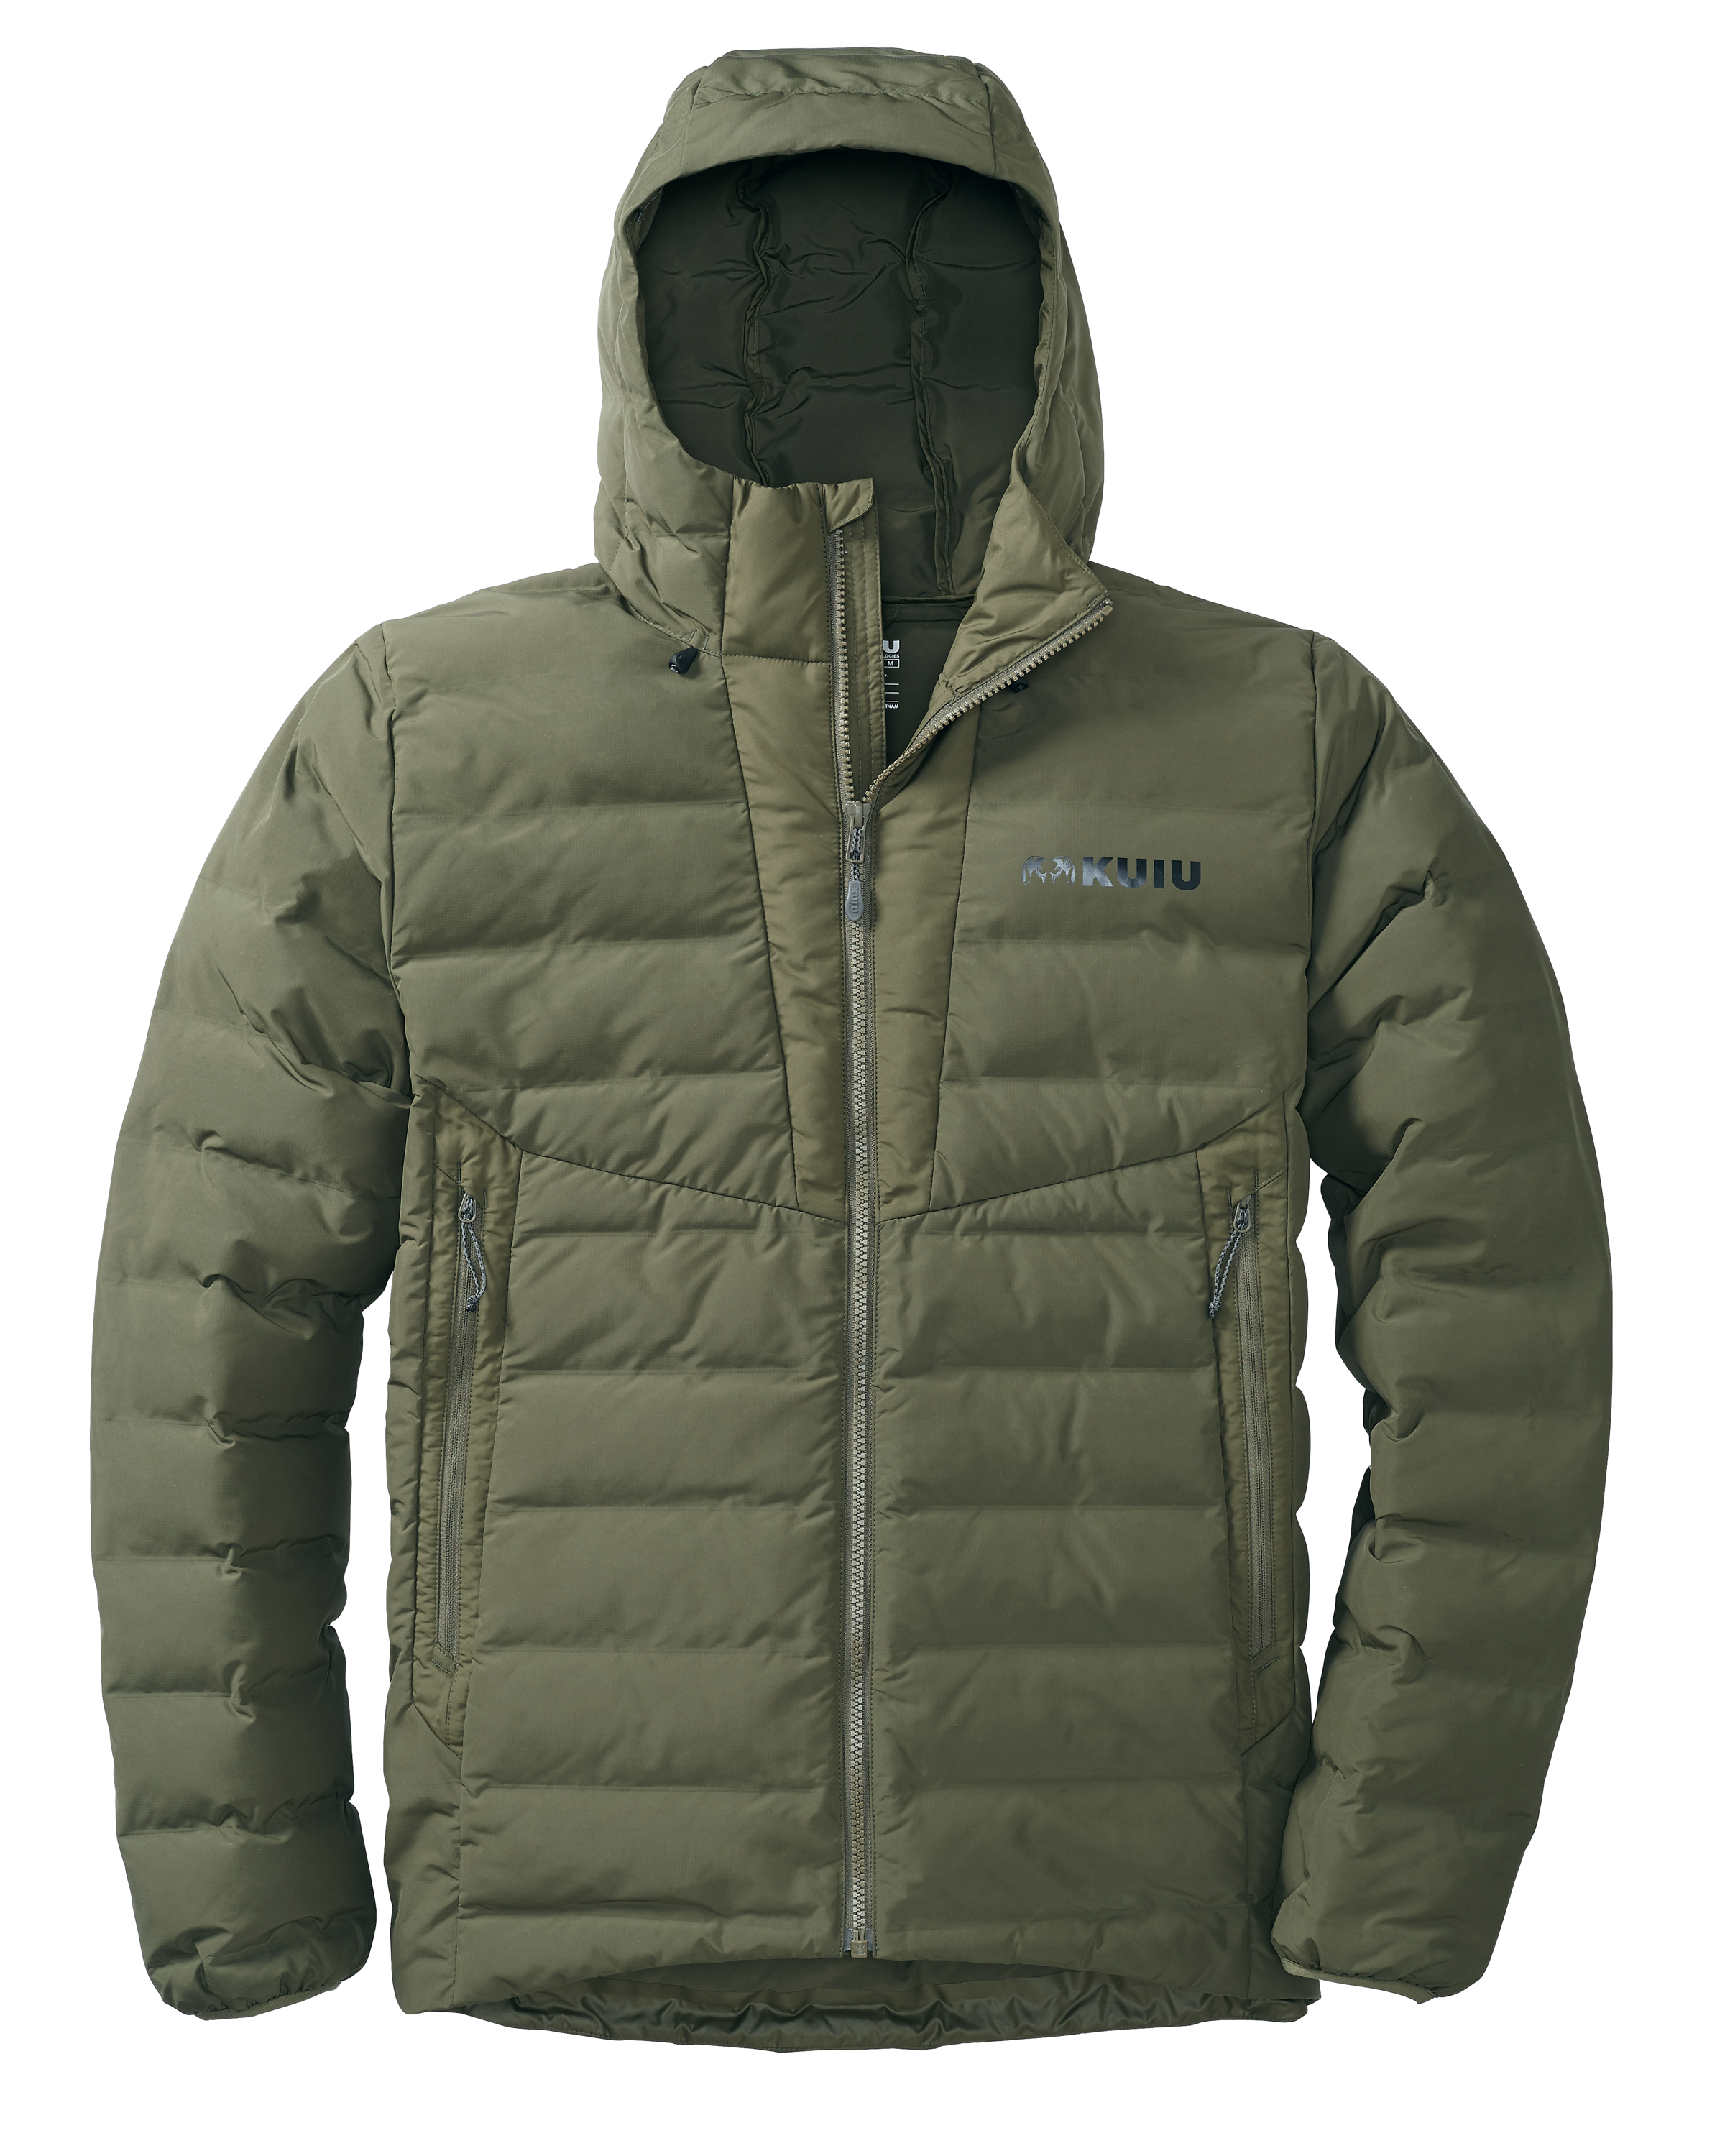 KUIU Elements Hooded Hunting Jacket in Olive | Size 2XL